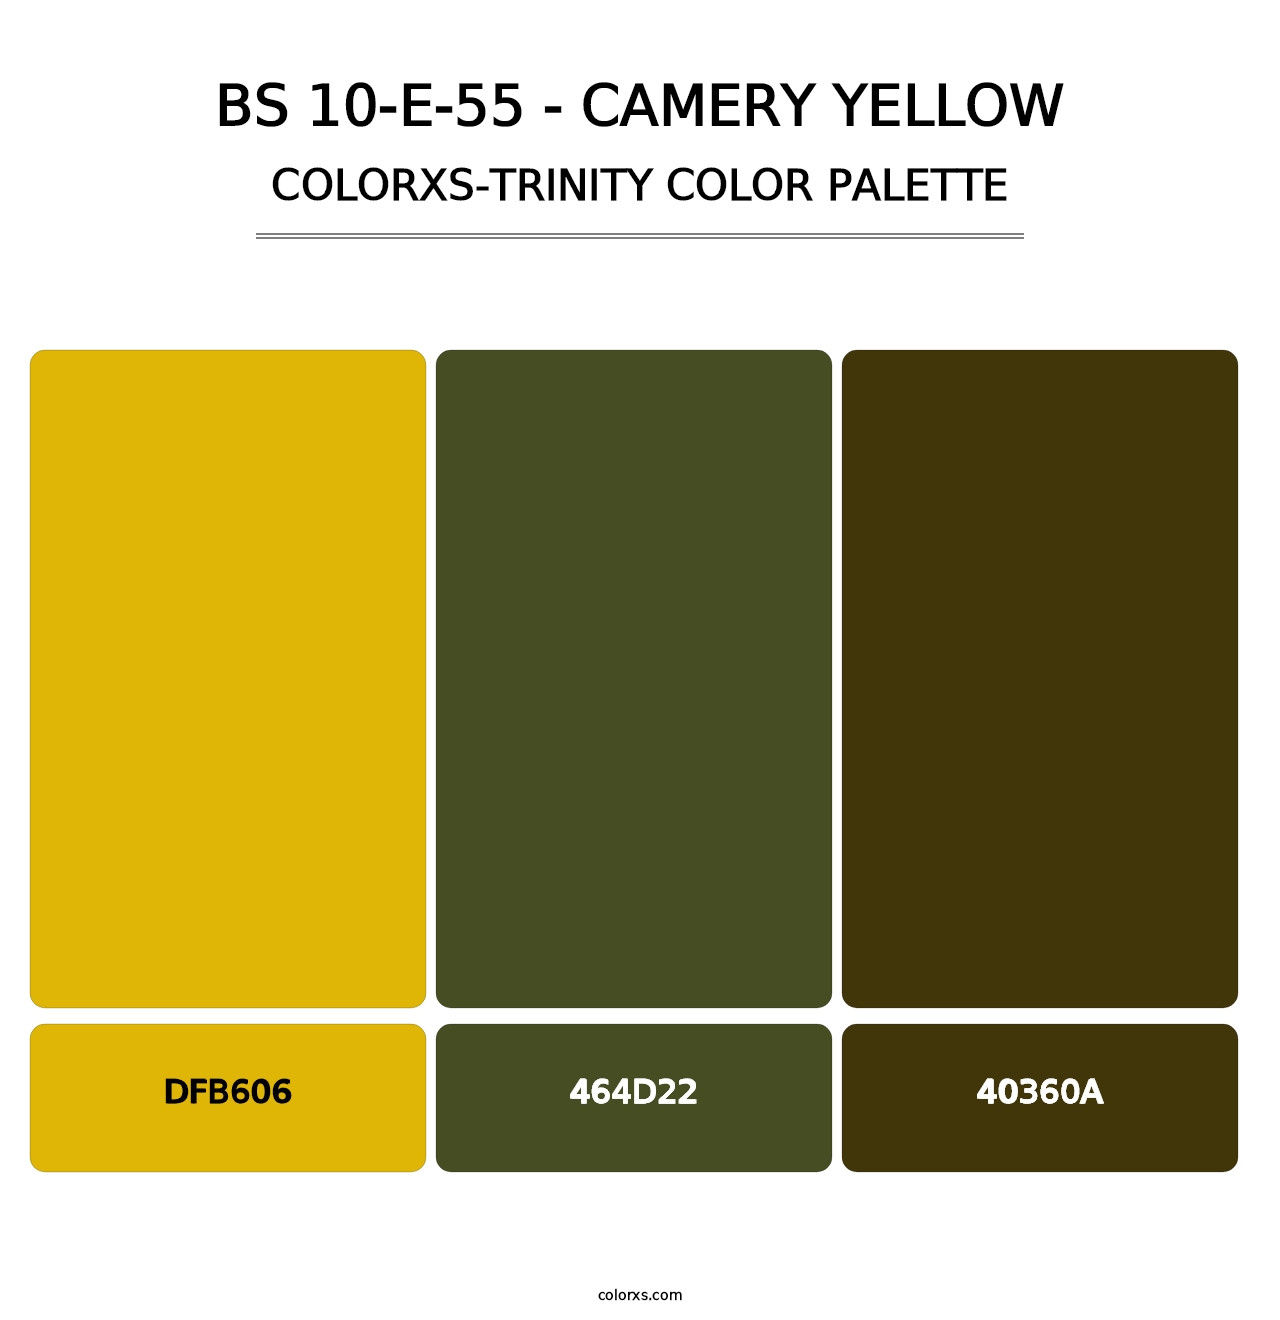 BS 10-E-55 - Camery Yellow - Colorxs Trinity Palette